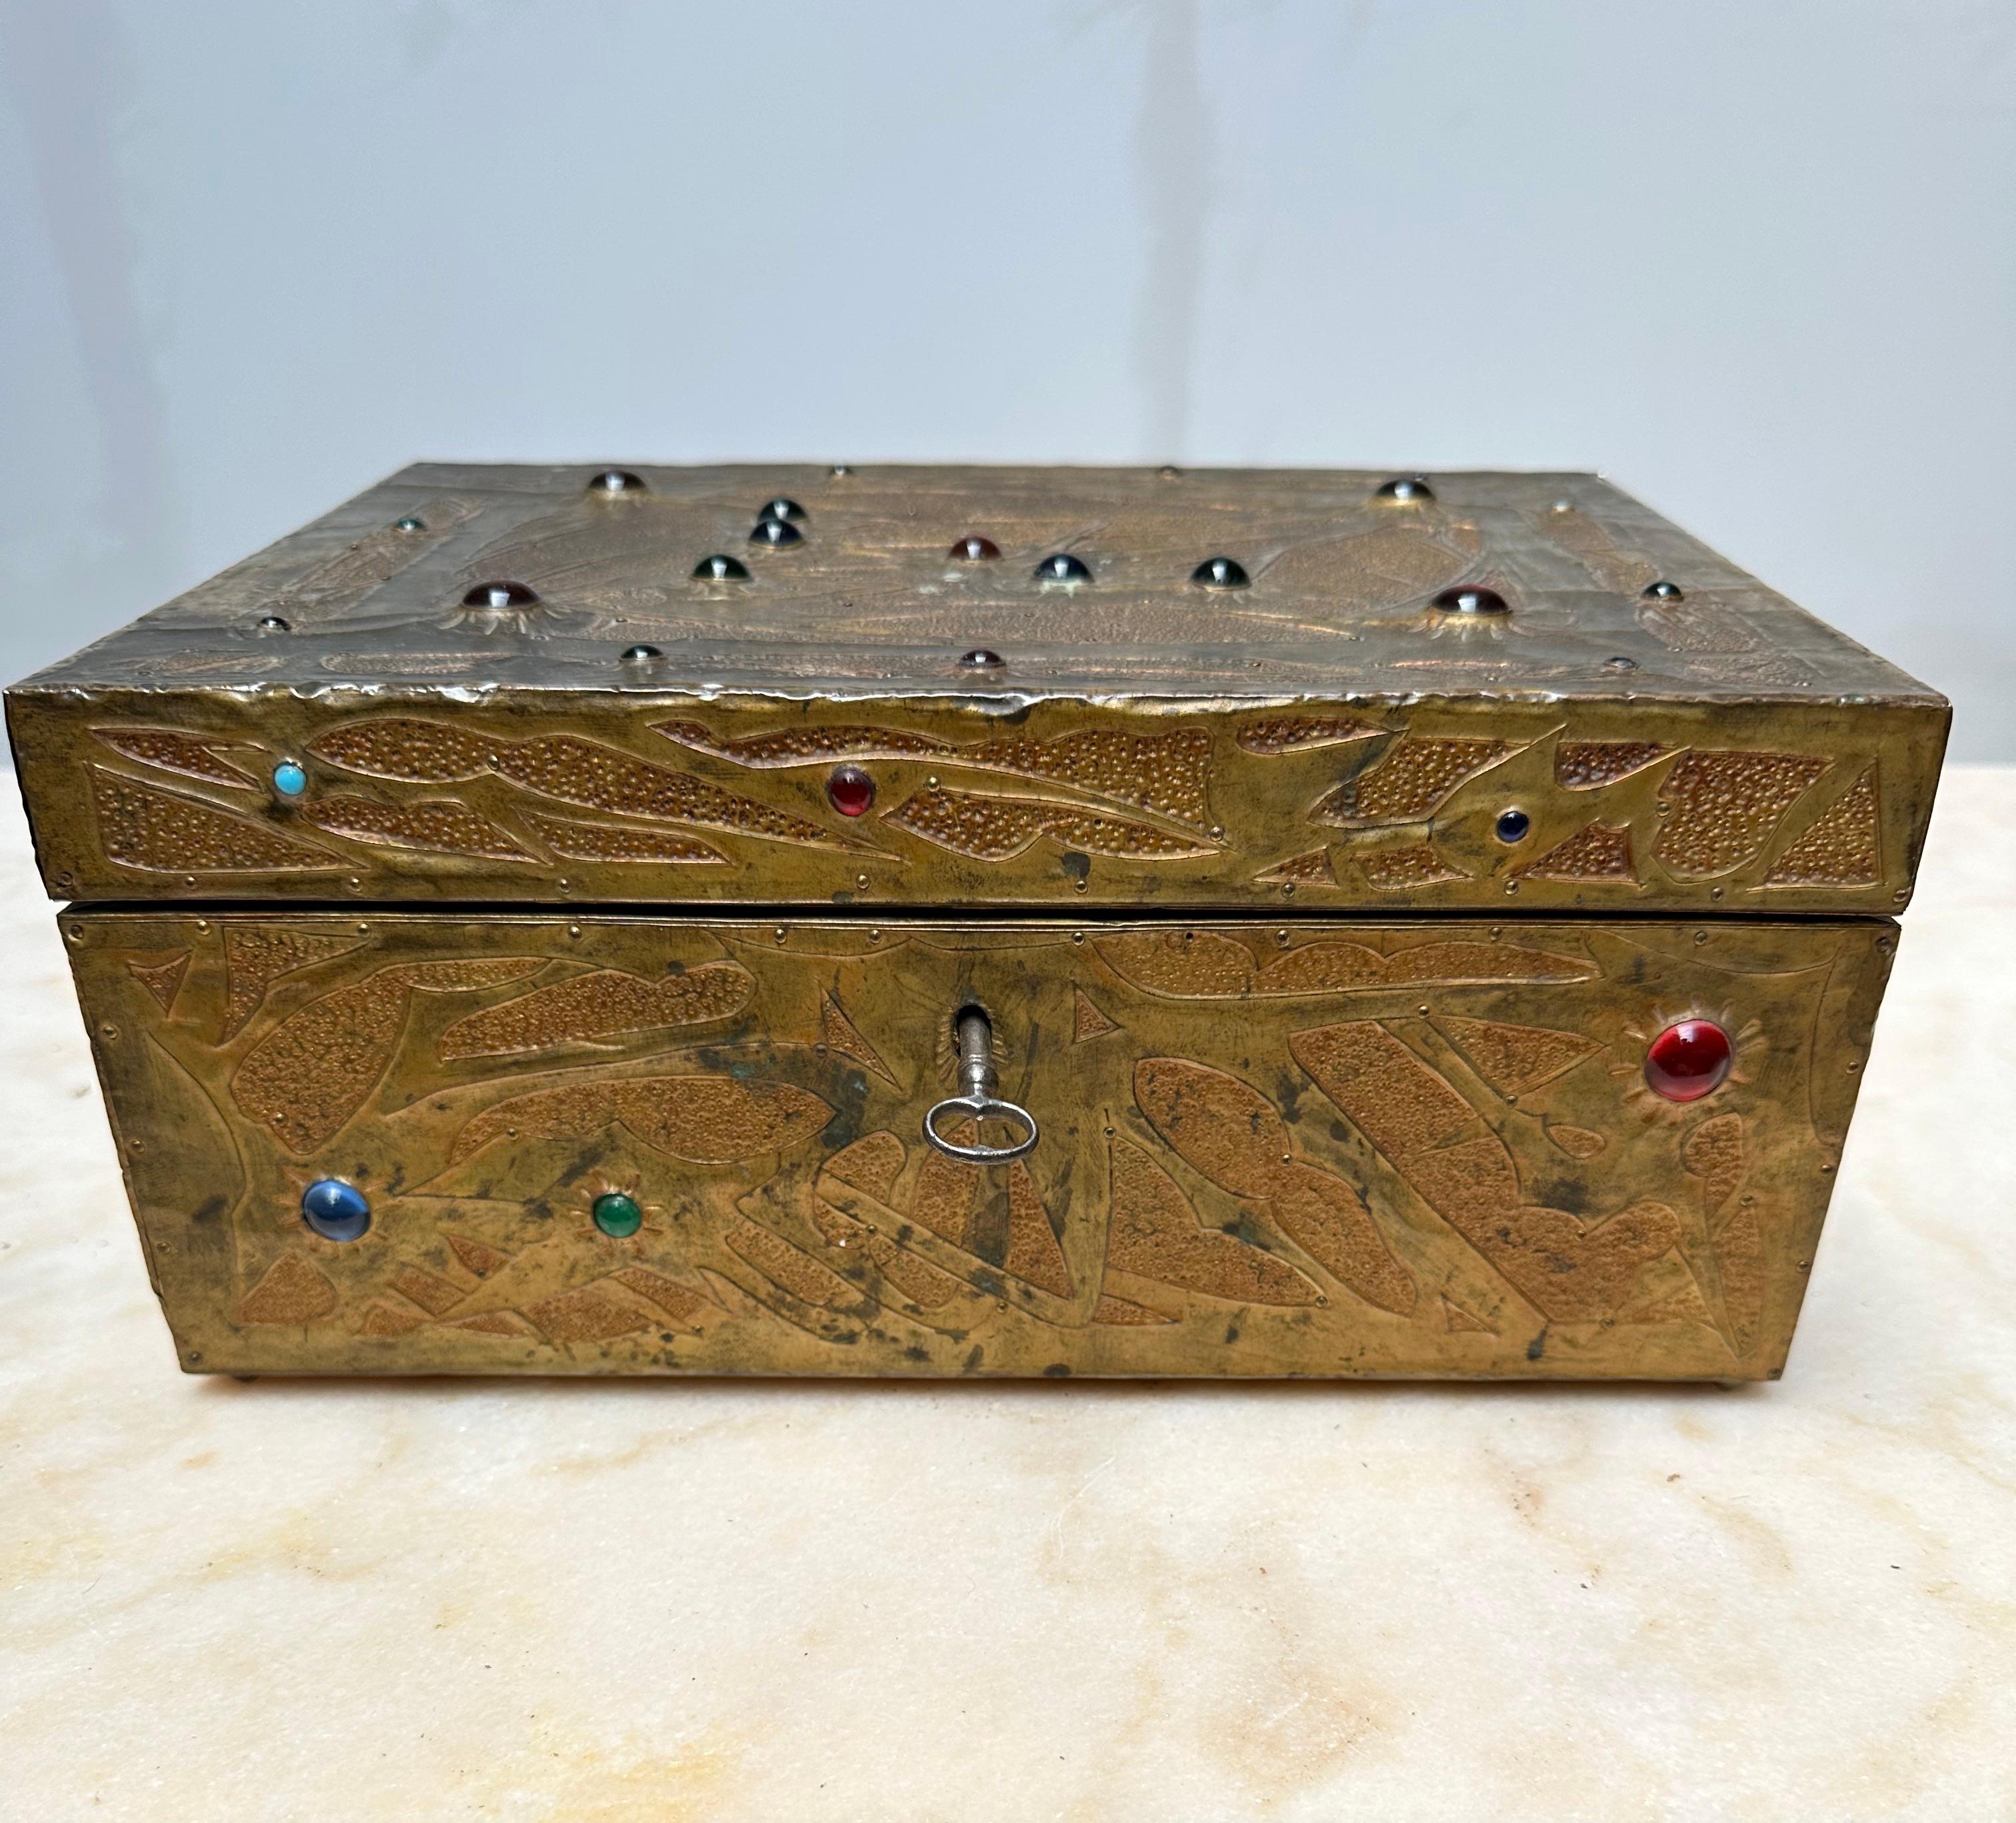 One of a kind and all hand-crafted, good size antique box by Alfred Daguet (1875-1942).

Alfred Daguet was a French craftsman/metalsmith, active around the early 1900s and who specialized in repoussé copper panels applied to hinged boxes, mantel